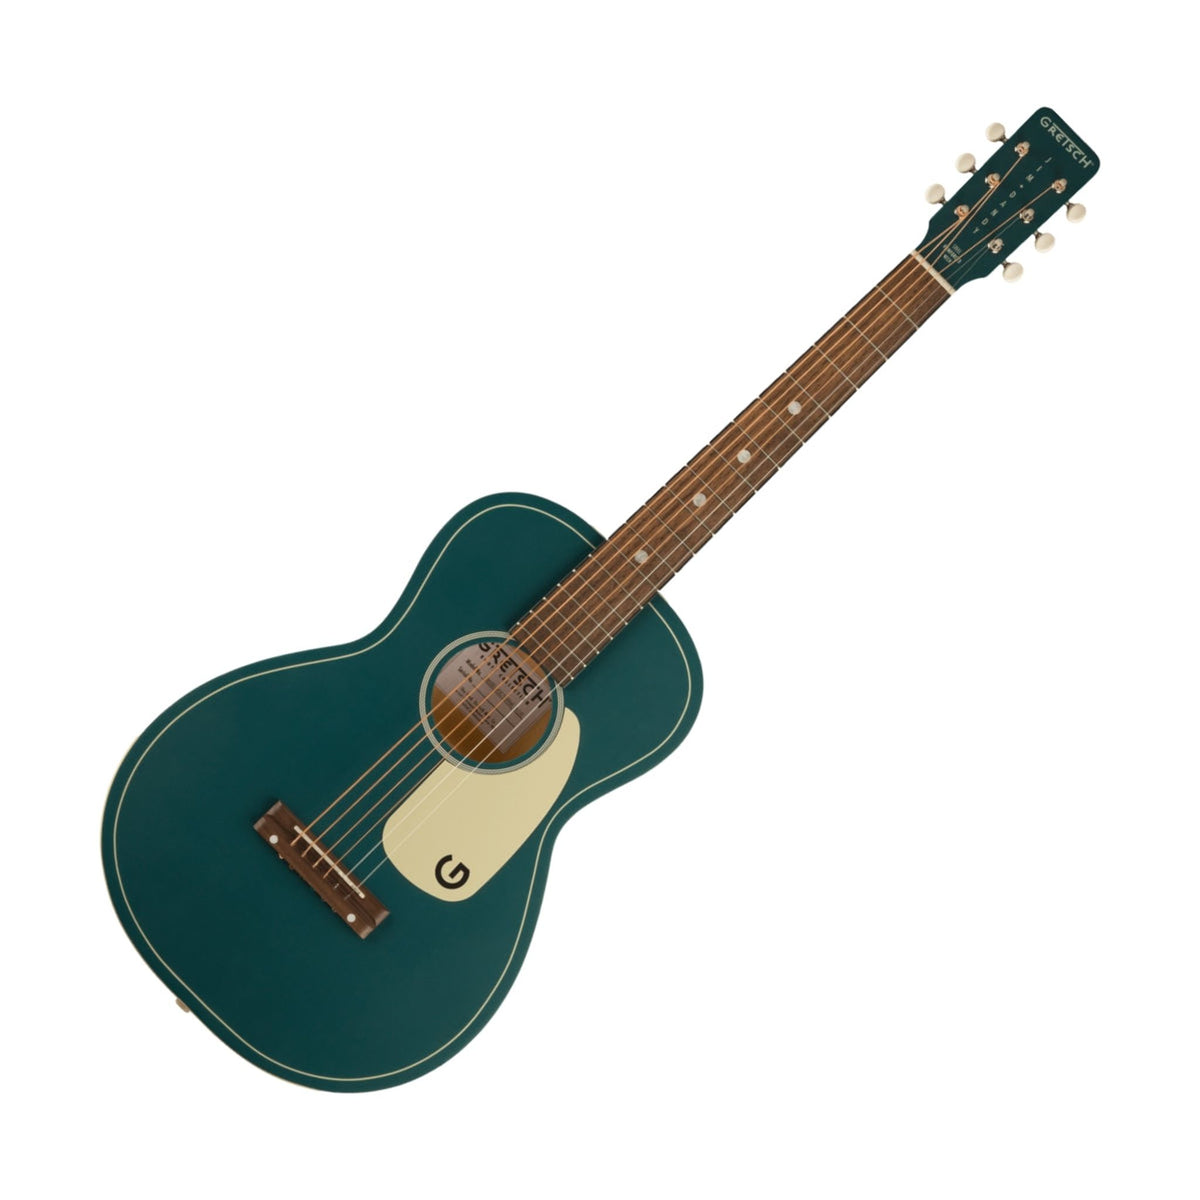 The Gretsch G9500 Jim Dandy Parlor Acoustic Guitar is faithful to the Gretsch “Rex” parlor guitars of the 1930s, ‘40s and ‘50s, the G9500 Jim Dandy™ Flat Top parlor-style model embodies everything that was great about everyone’s first guitar.